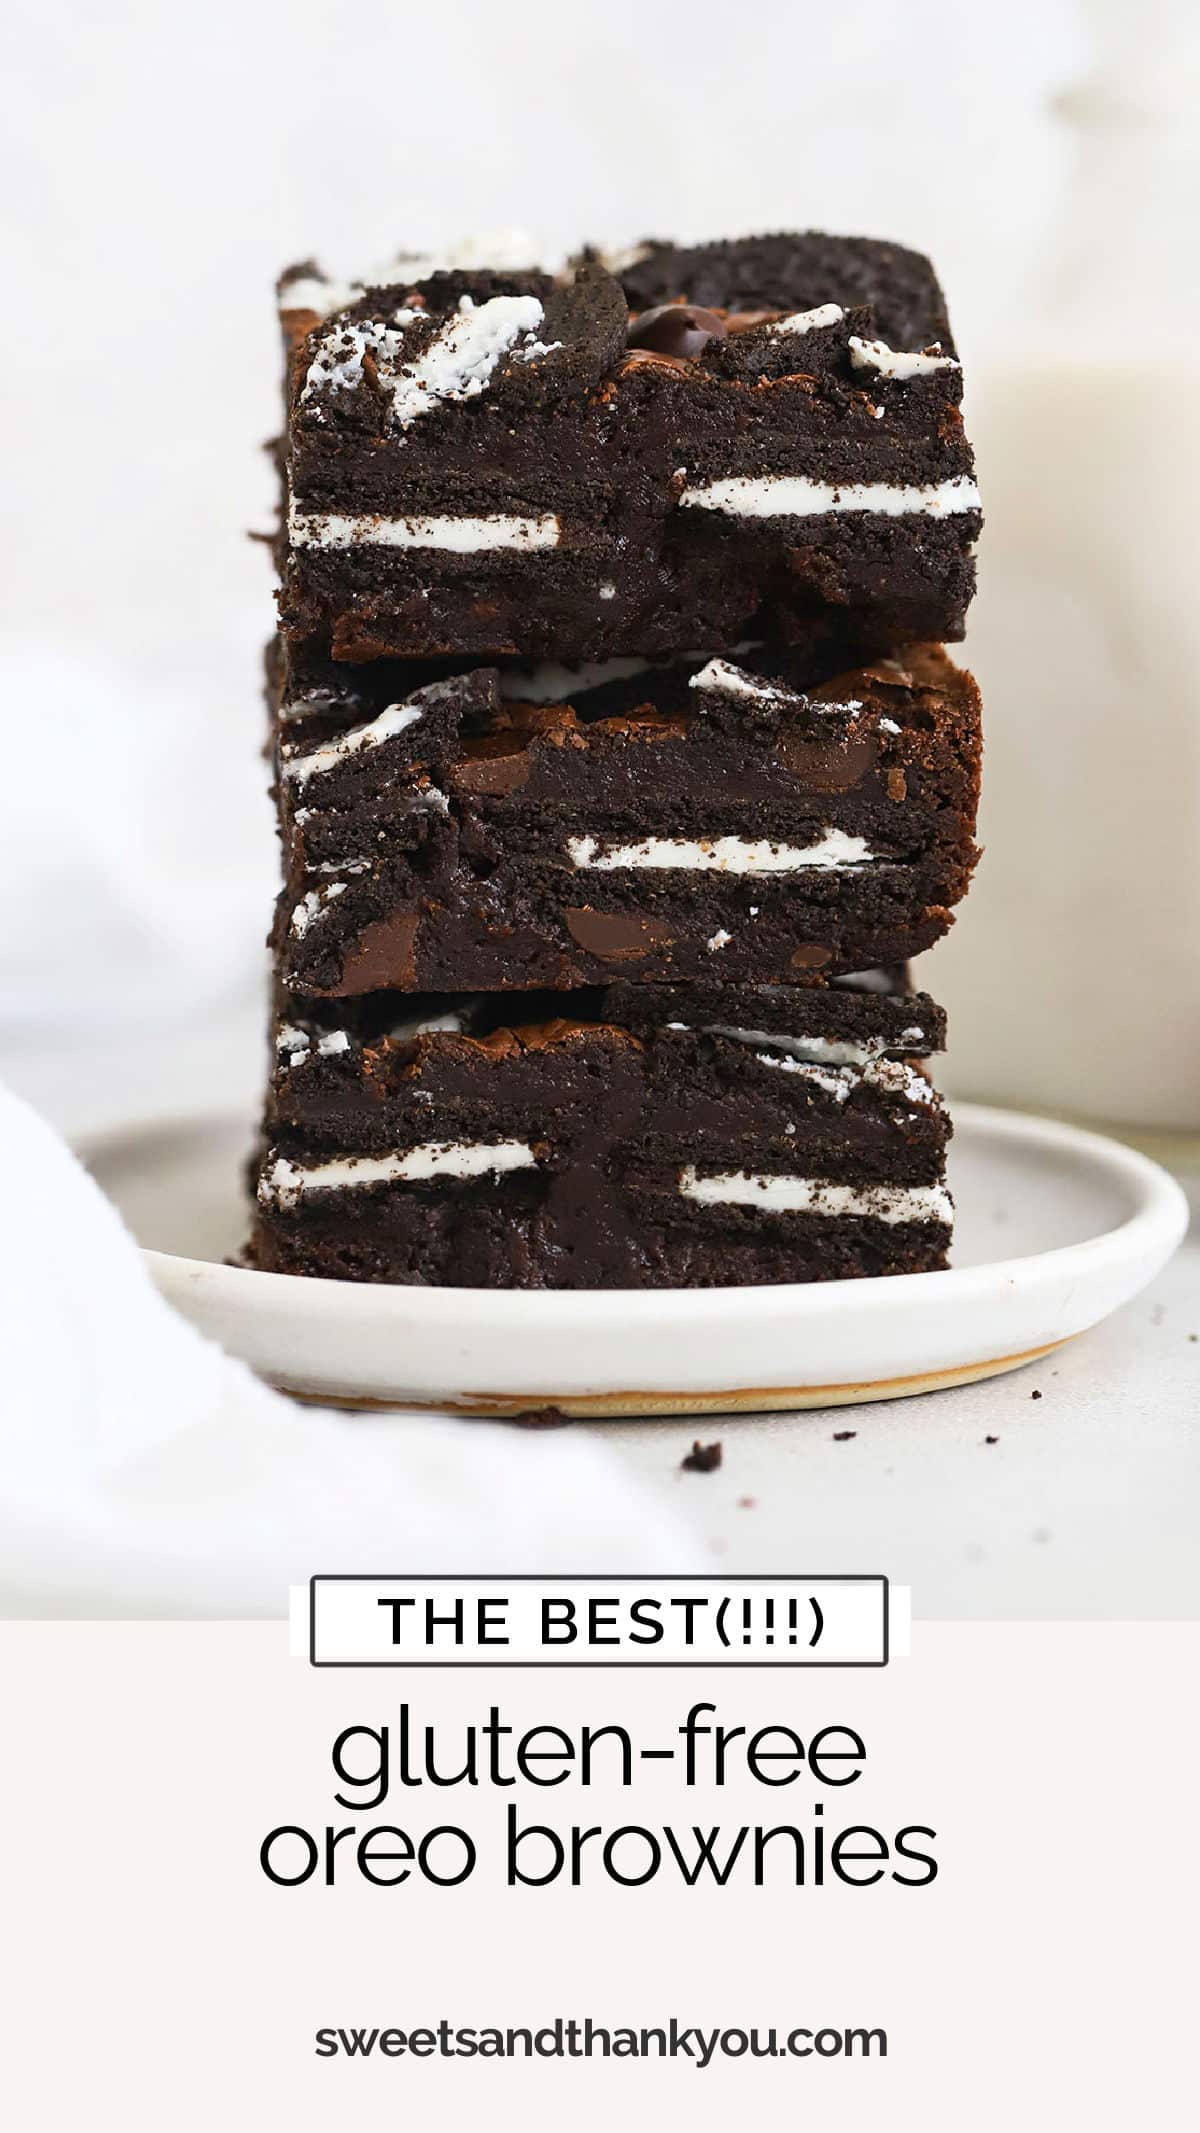 These luscious gluten-free oreo brownies are fudgy, chewy & delicious! If you love Oreos, you'll fall hard for these easy brownies! / gluten free oreo brownie recipe / the best oreo brownies / fudgy oreo brownies / chewy oreo brownies / oreo stuffed brownies / gluten free brownie recipe / gluten-free oreo brownies recipe / gluten free oreo desserts / 